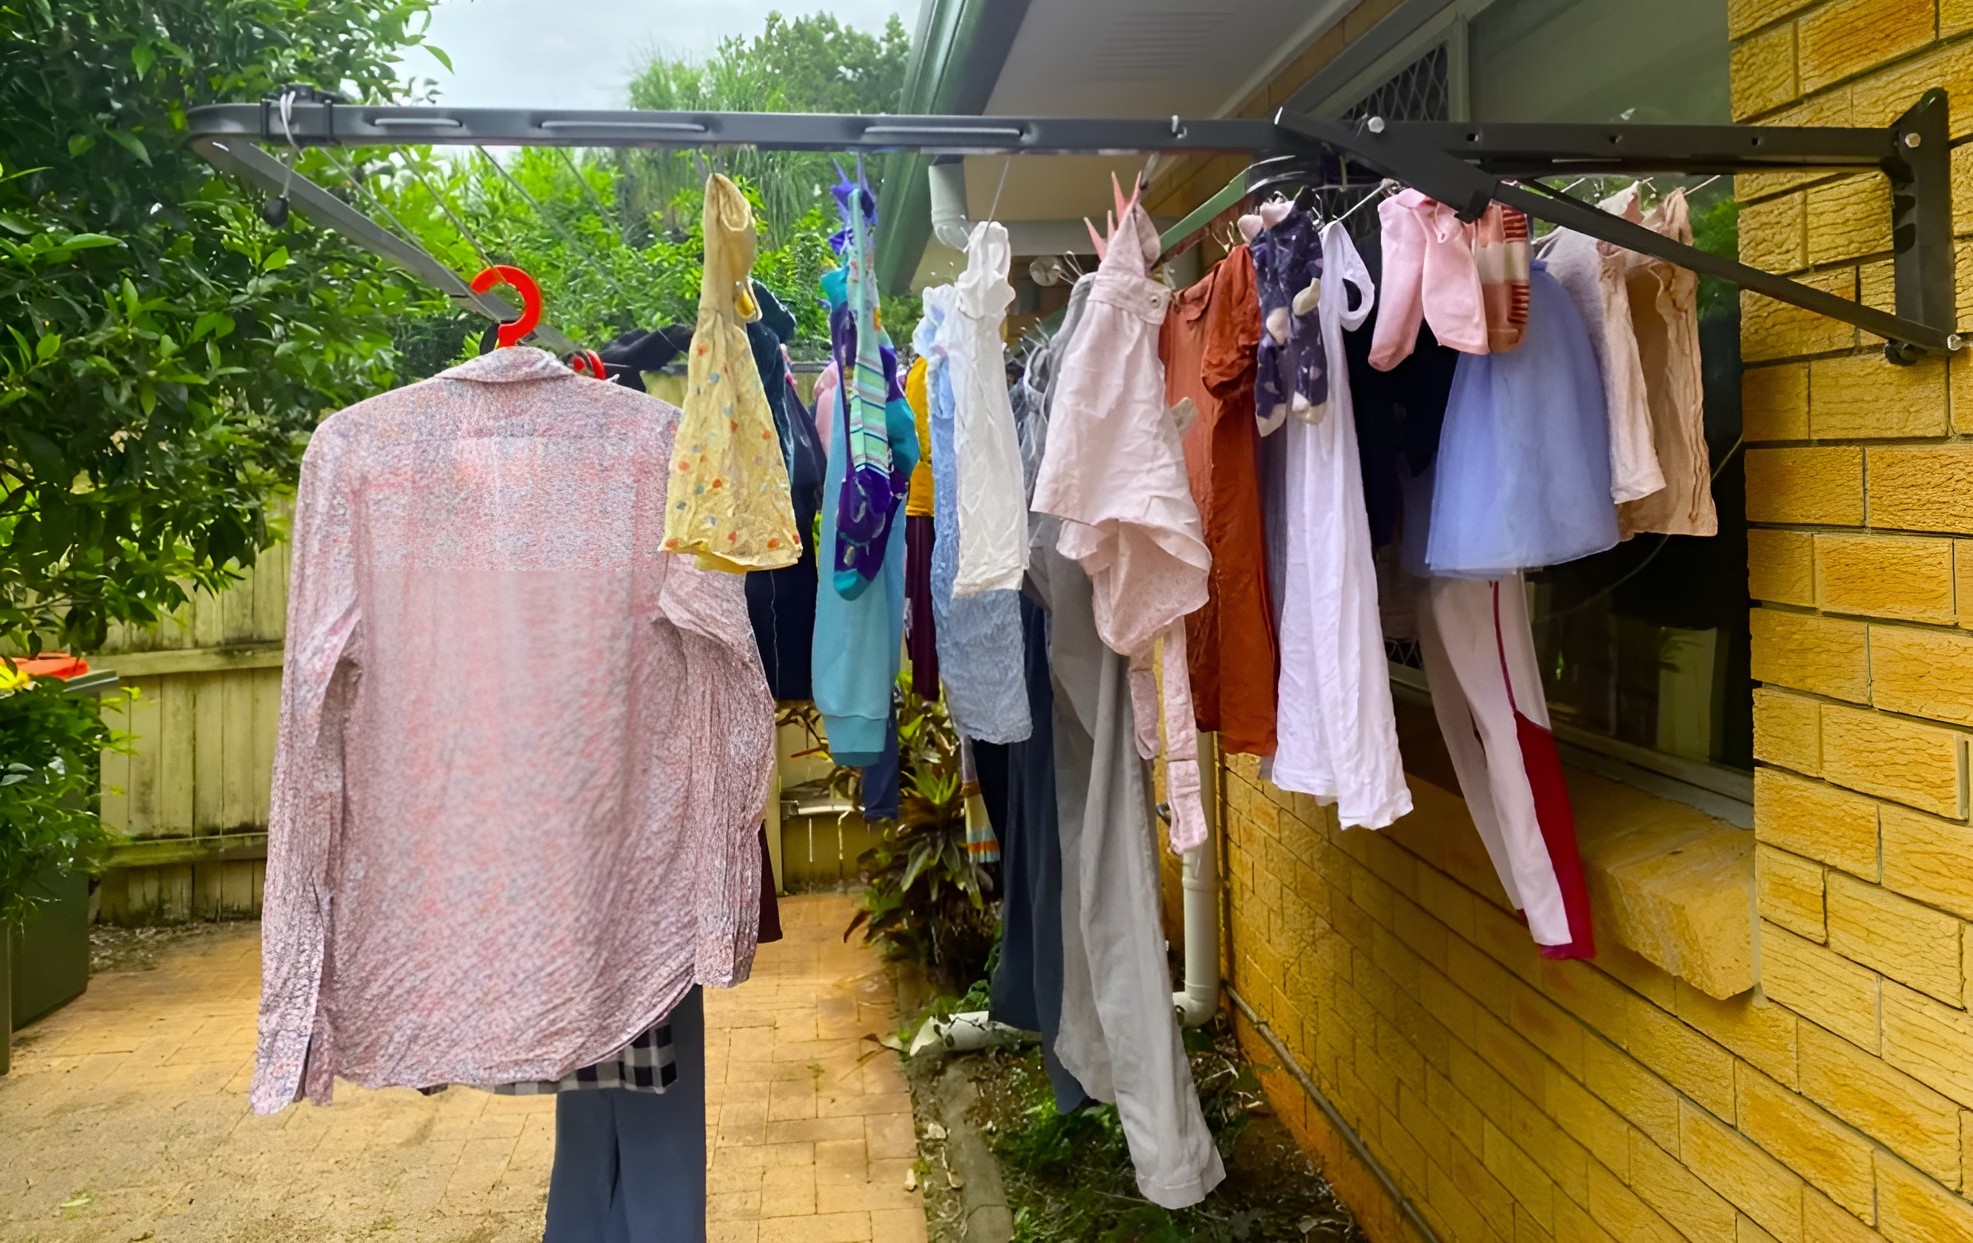 Top 7 Essential Fold Away Clothesline Models: Space-Saving Solutions for Your Laundry Needs in Australia Summary